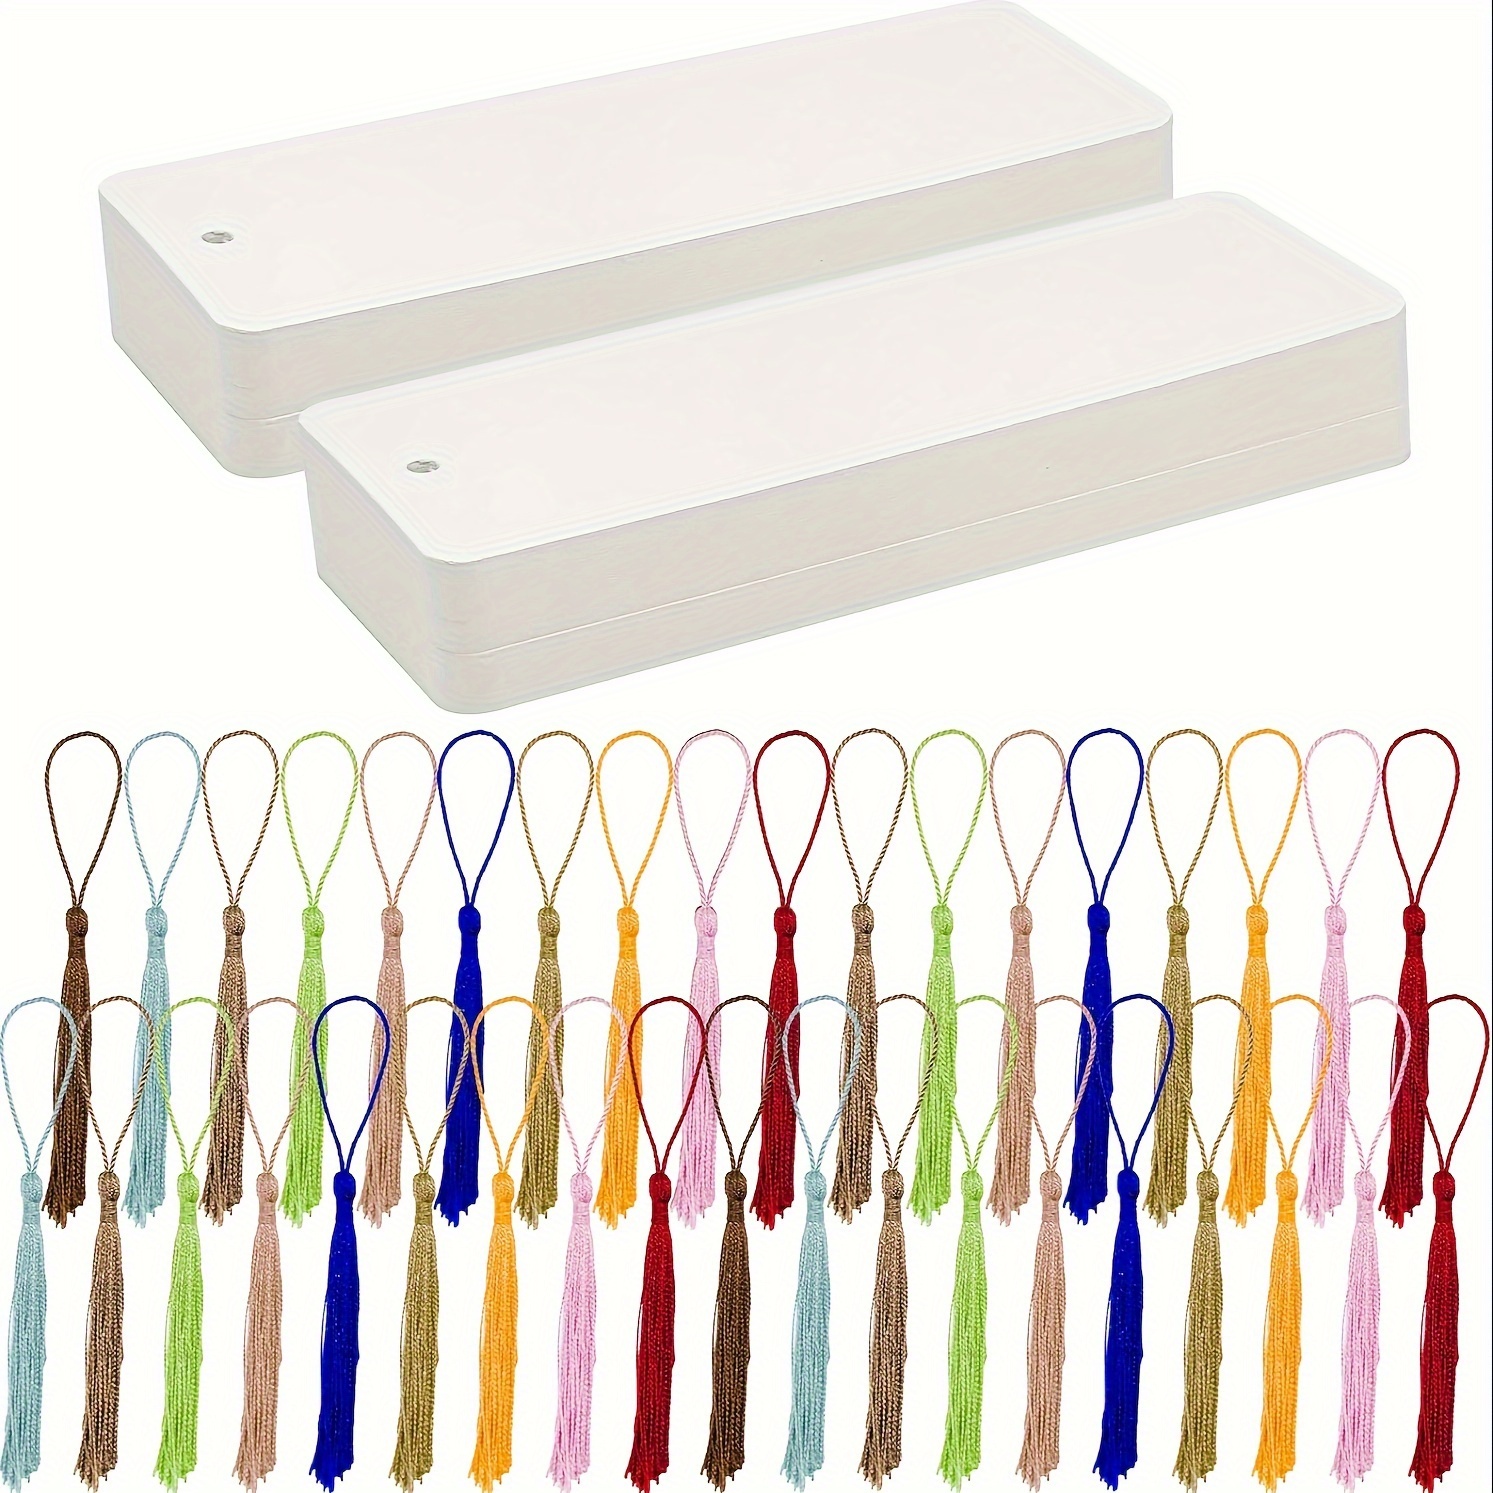 25PCS Blank Paper Bookmarks with Tassels Rectangular Thick Paper Bookmarks  DIY Bookmarks Gift for Friends